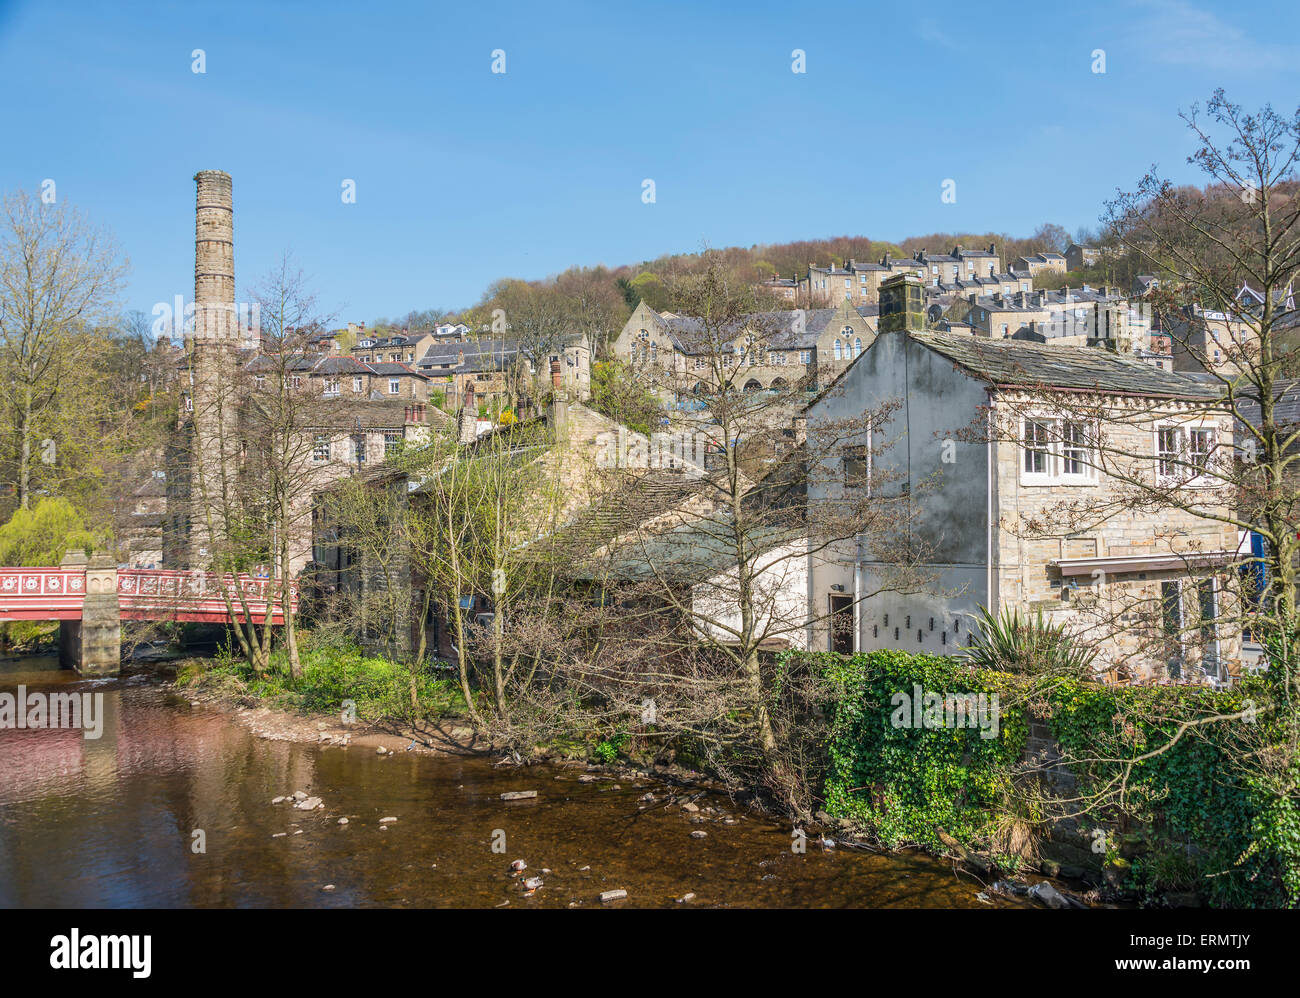 The pretty tourist town of Hebden Bridge in the South Pennine region of West Yorkshire showing steep terraced houses on the surr Stock Photo